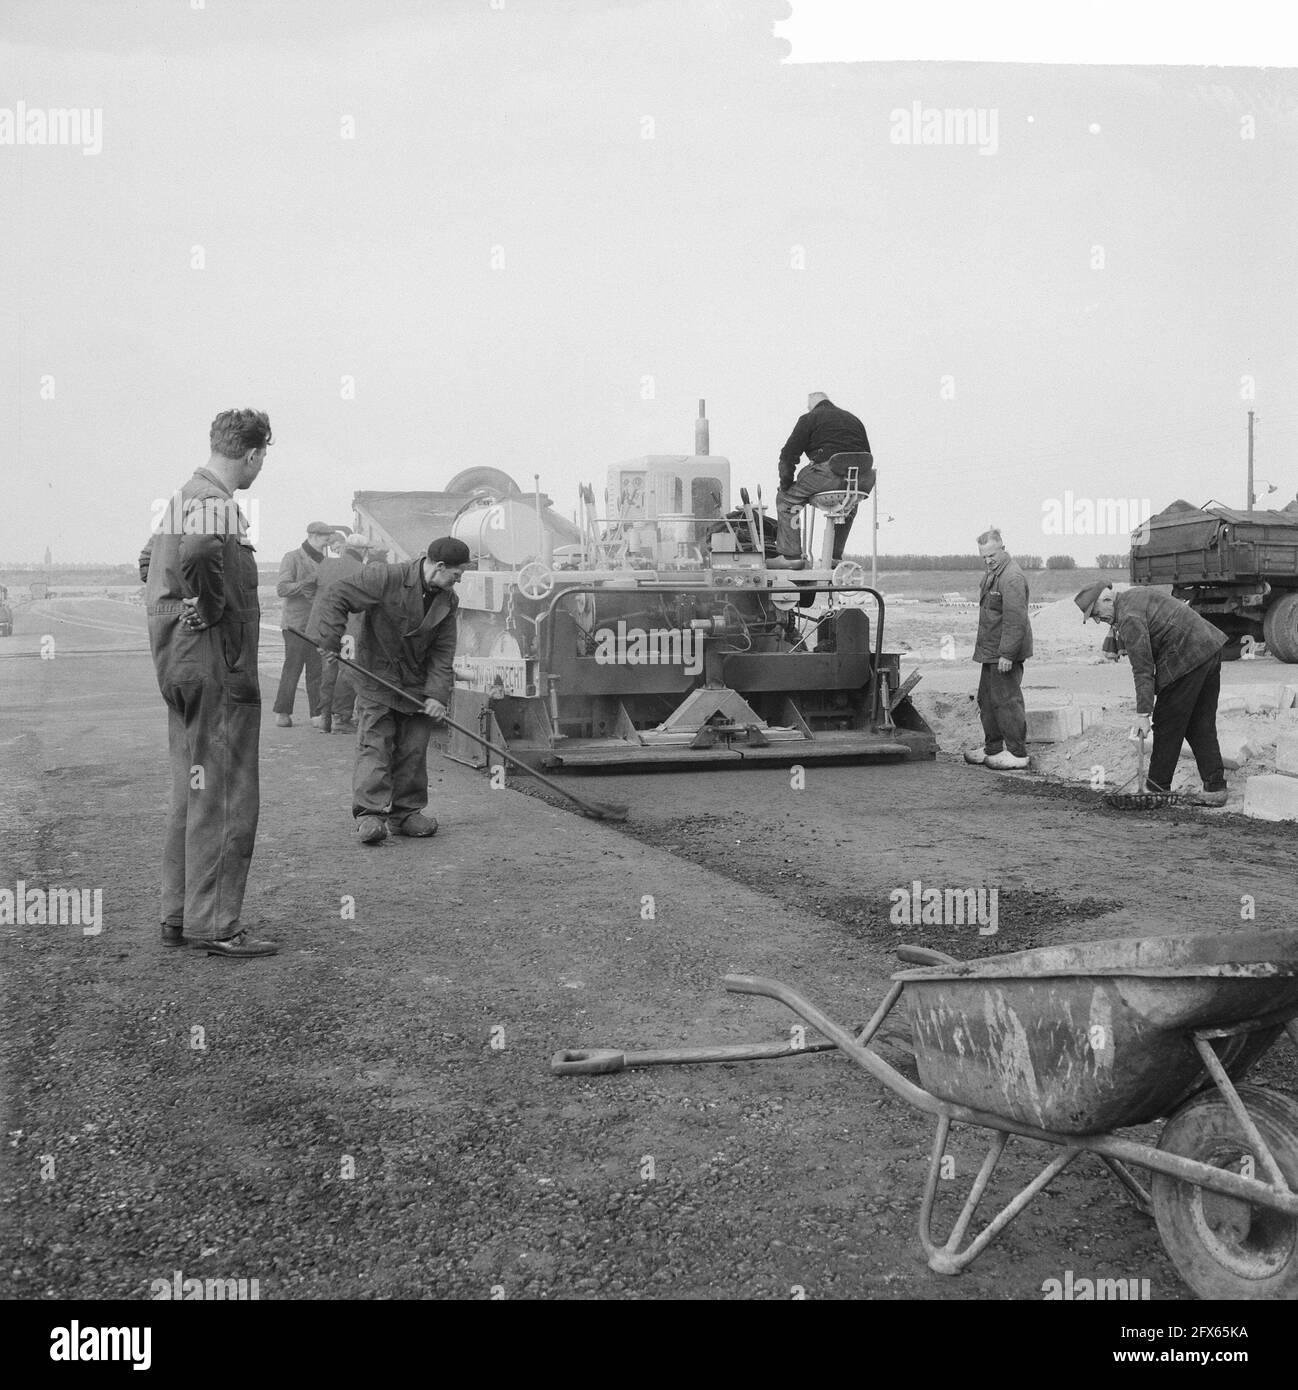 Construction of Europaboulevard in the garden city Buitenveldert. Asphalt machine at work, April 10, 1961, machinery, The Netherlands, 20th century press agency photo, news to remember, documentary, historic photography 1945-1990, visual stories, human history of the Twentieth Century, capturing moments in time Stock Photo